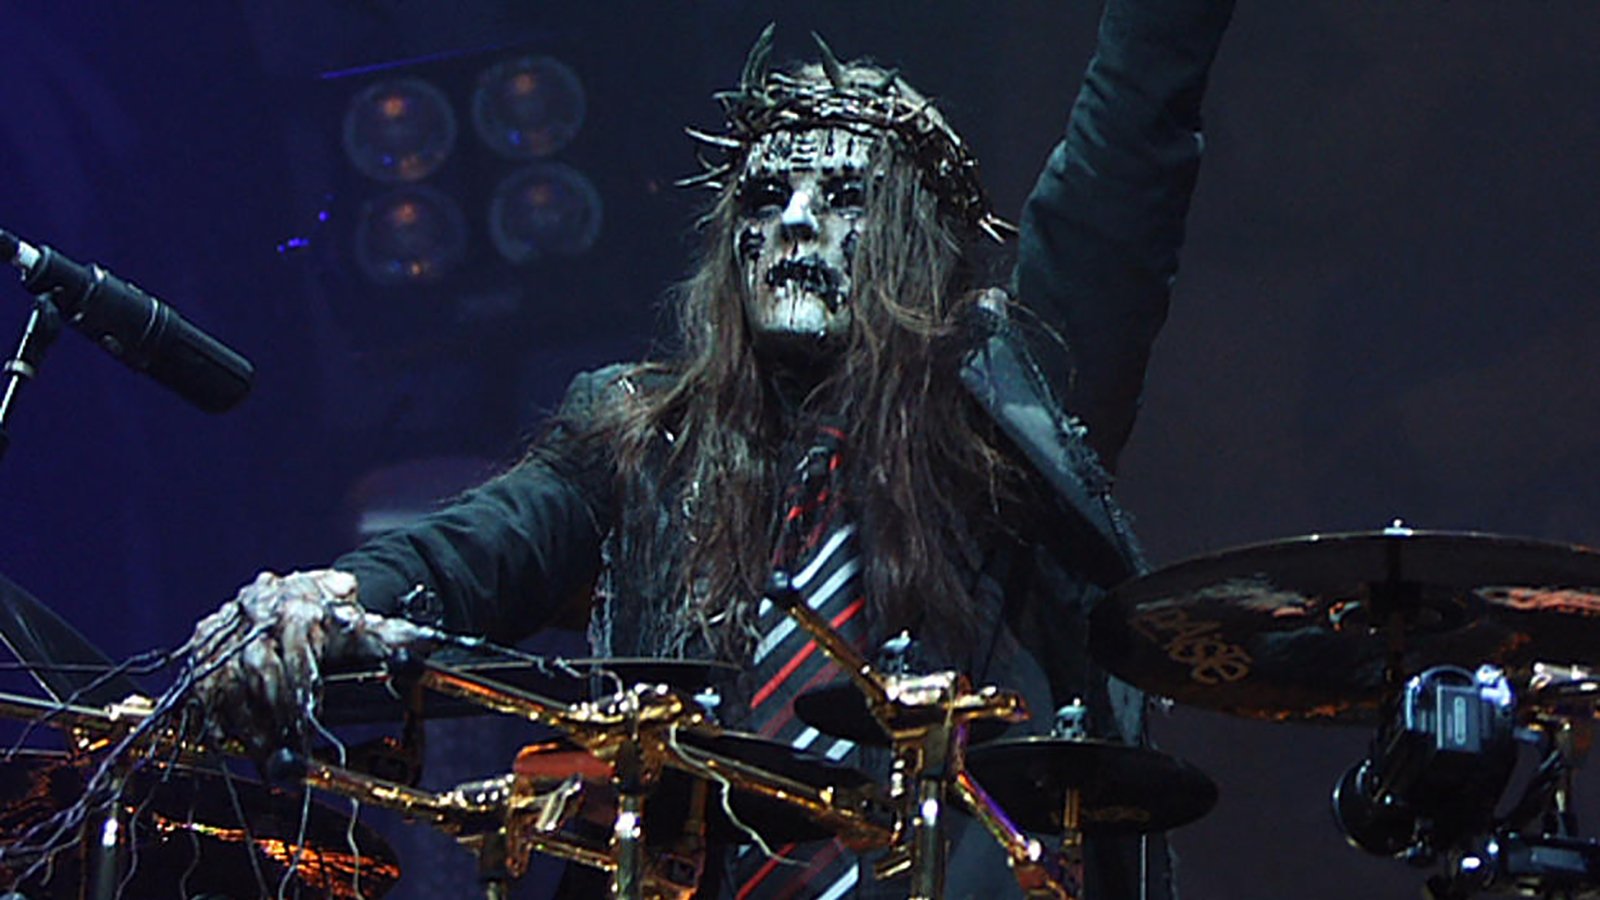 Times Joey Jordison Proved He's More Than Just A Drummer. Articles Ultimate Guitar.Com